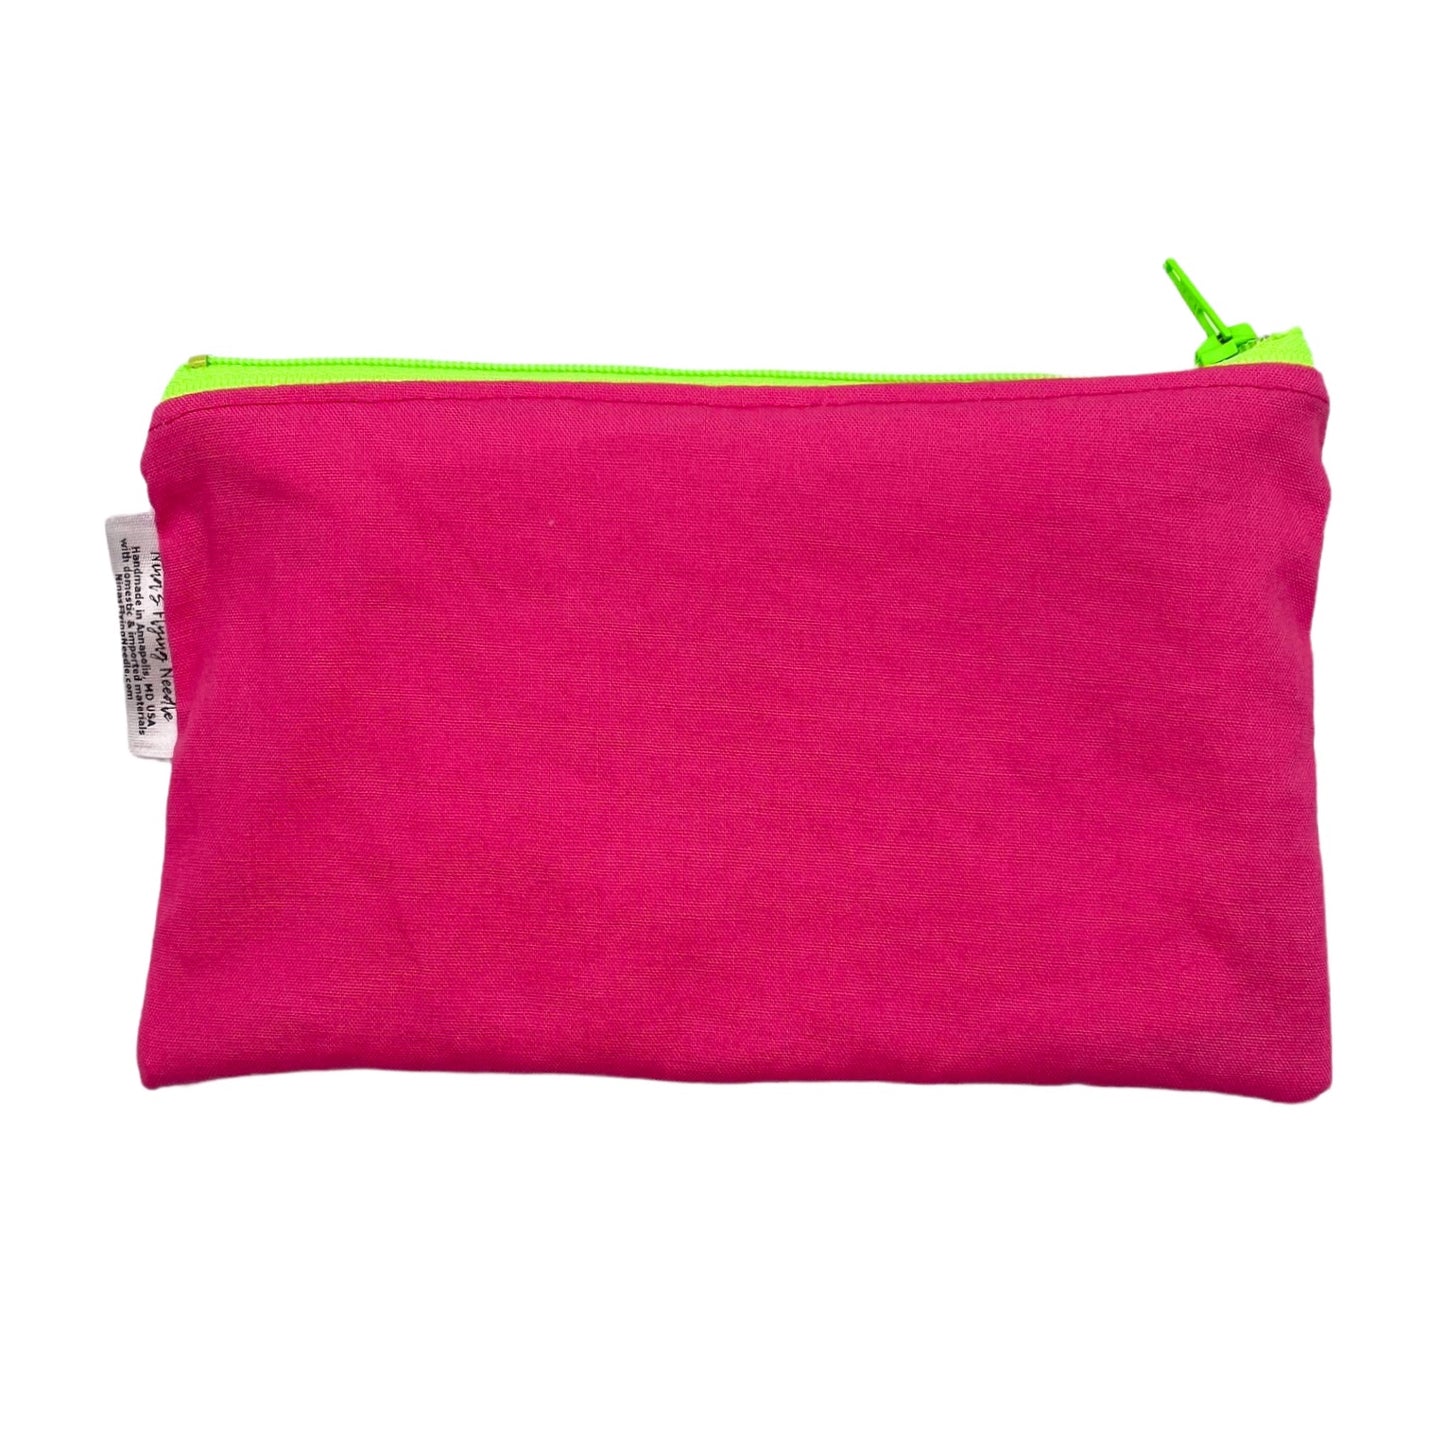 Knick Knack Sized Reusable Zippered Bag Solid Pink